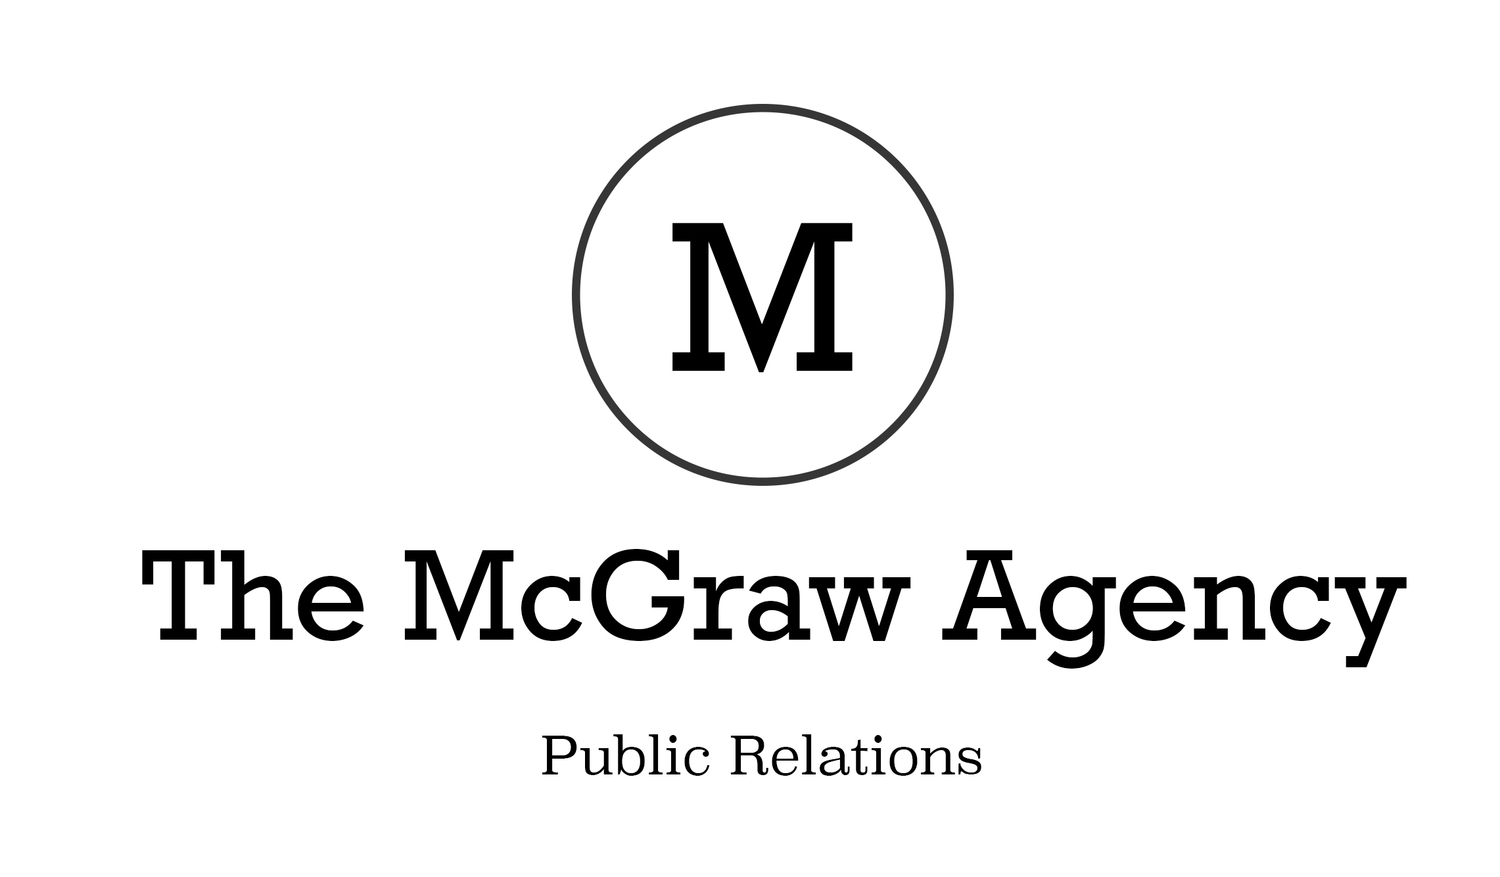 The McGraw Agency